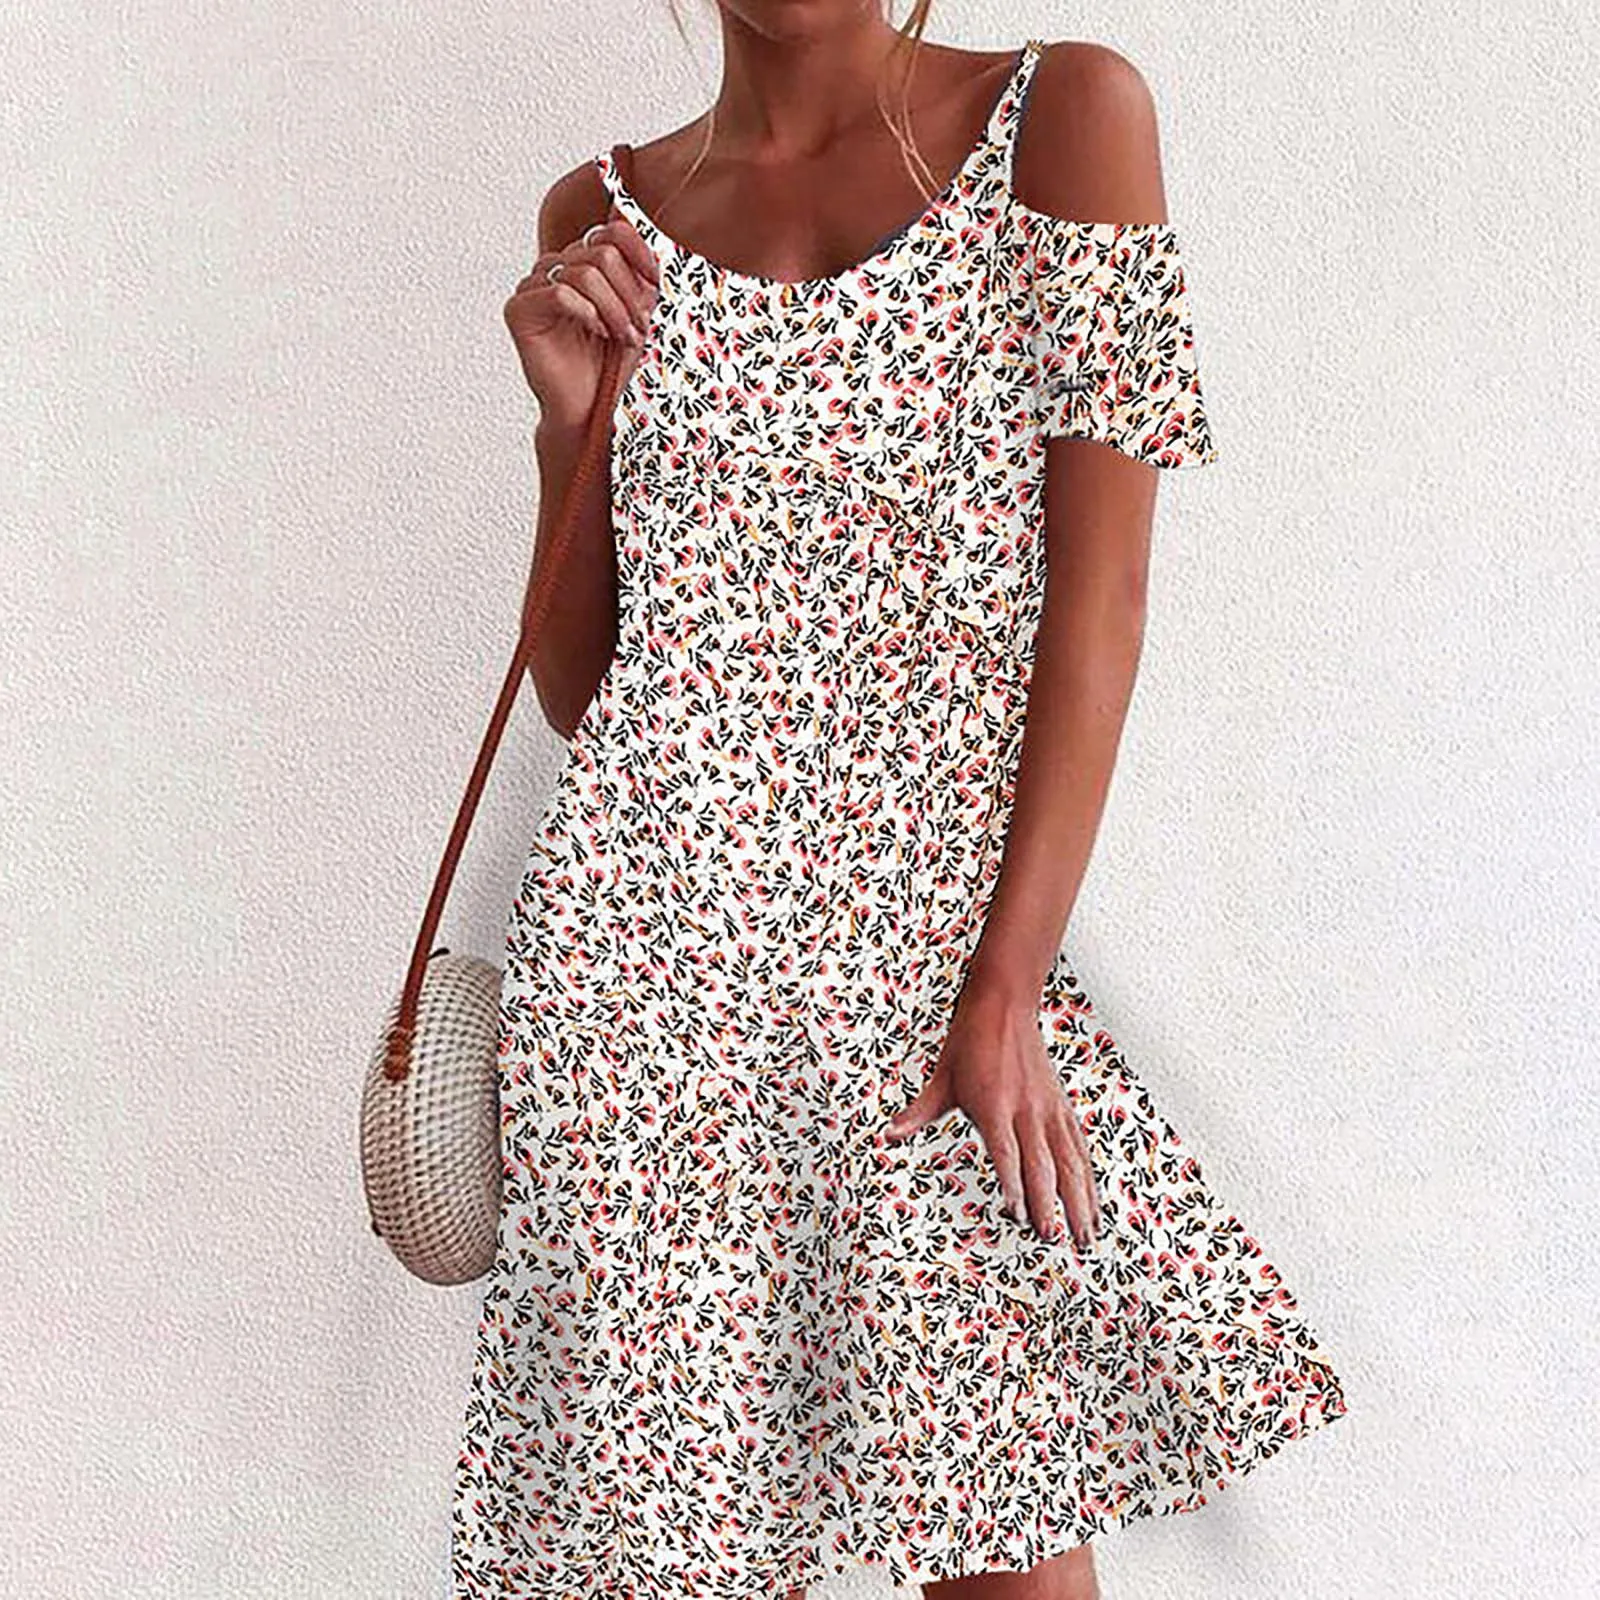 Women Summer Bohemian O-neck Printed Short-sleeved Strapless Pullover Dresses 2021 casual floral print beach dress Vestidos cute bathing suit cover ups